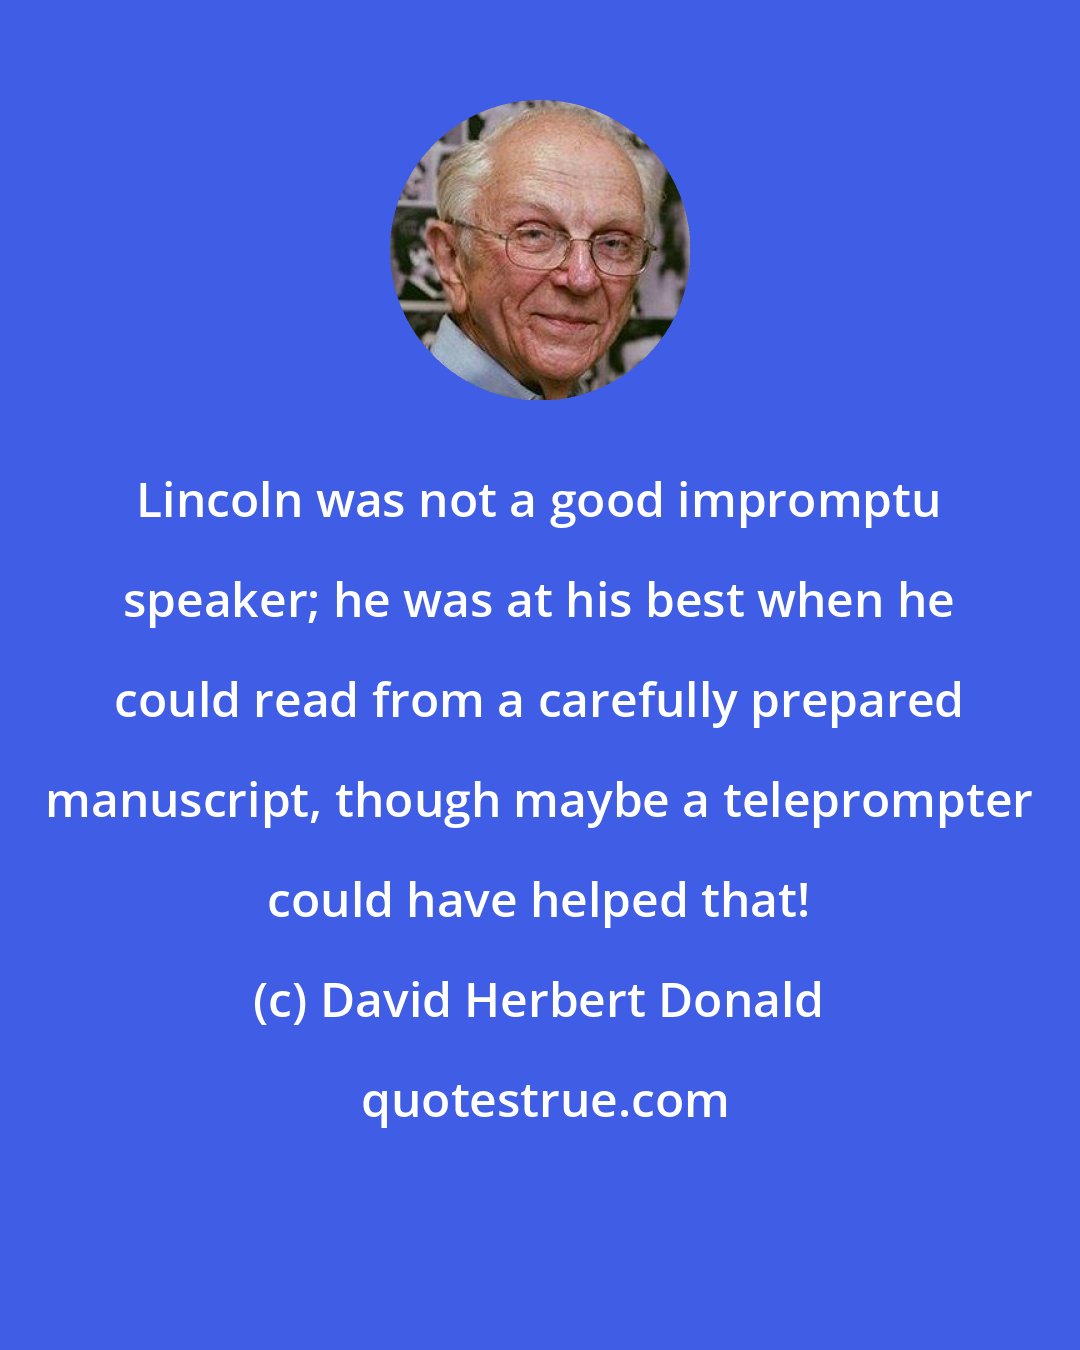 David Herbert Donald: Lincoln was not a good impromptu speaker; he was at his best when he could read from a carefully prepared manuscript, though maybe a teleprompter could have helped that!